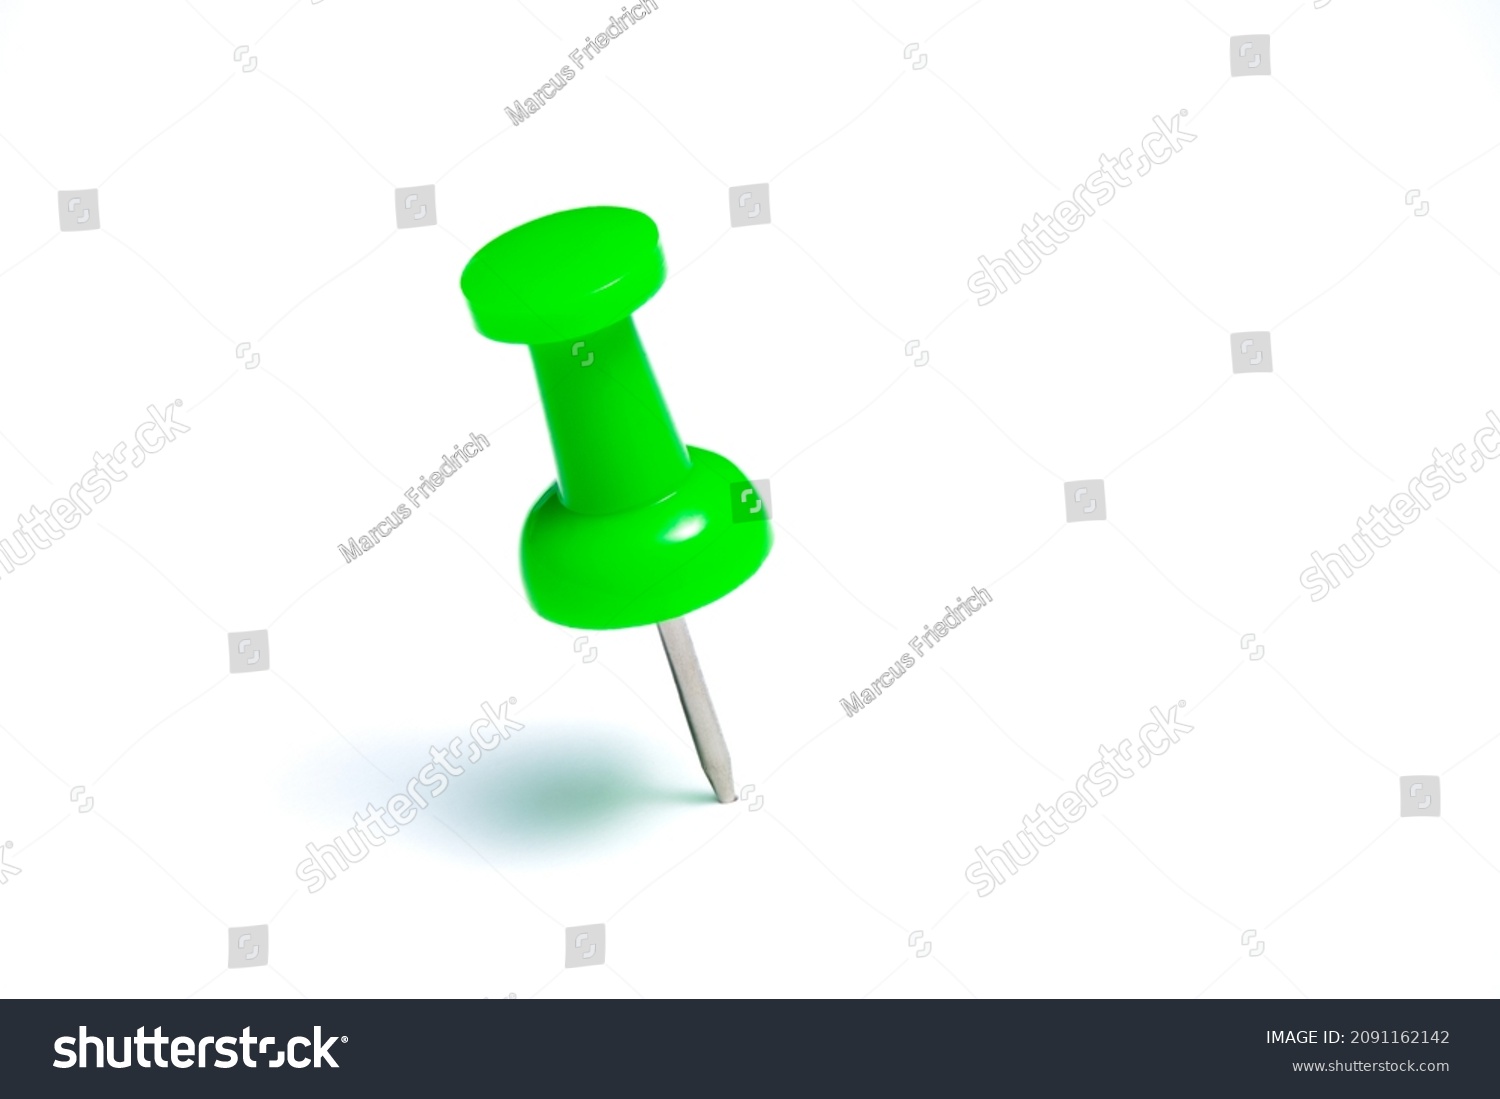 Green push pin or thumbtack isolated on a white background. #2091162142